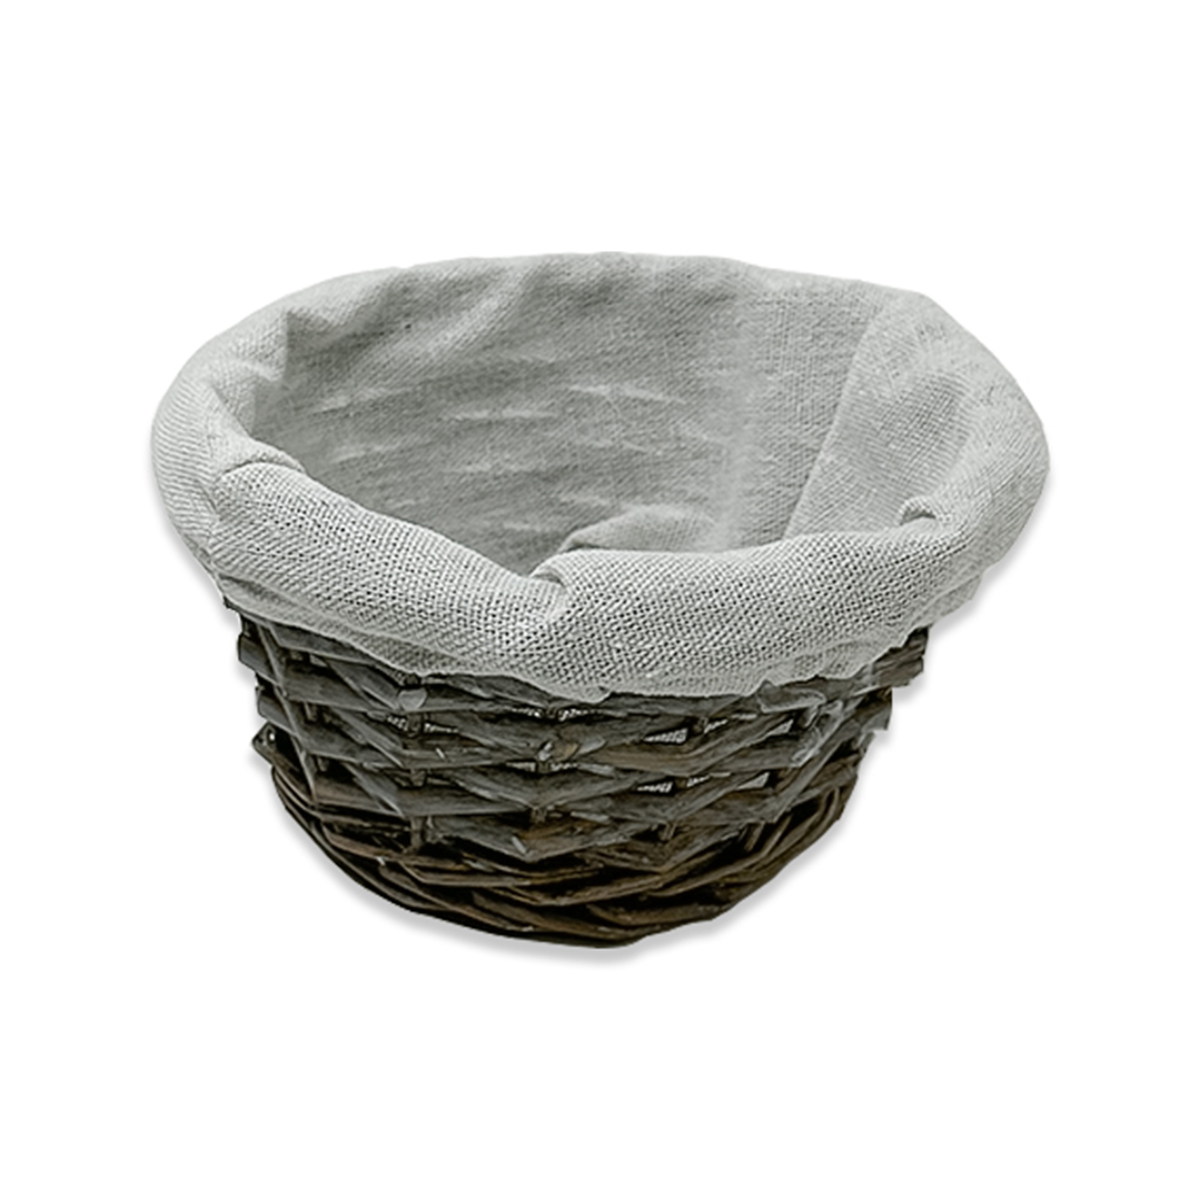 Savannah Small Round Utility with Cloth Liner - Antique Grey 6in